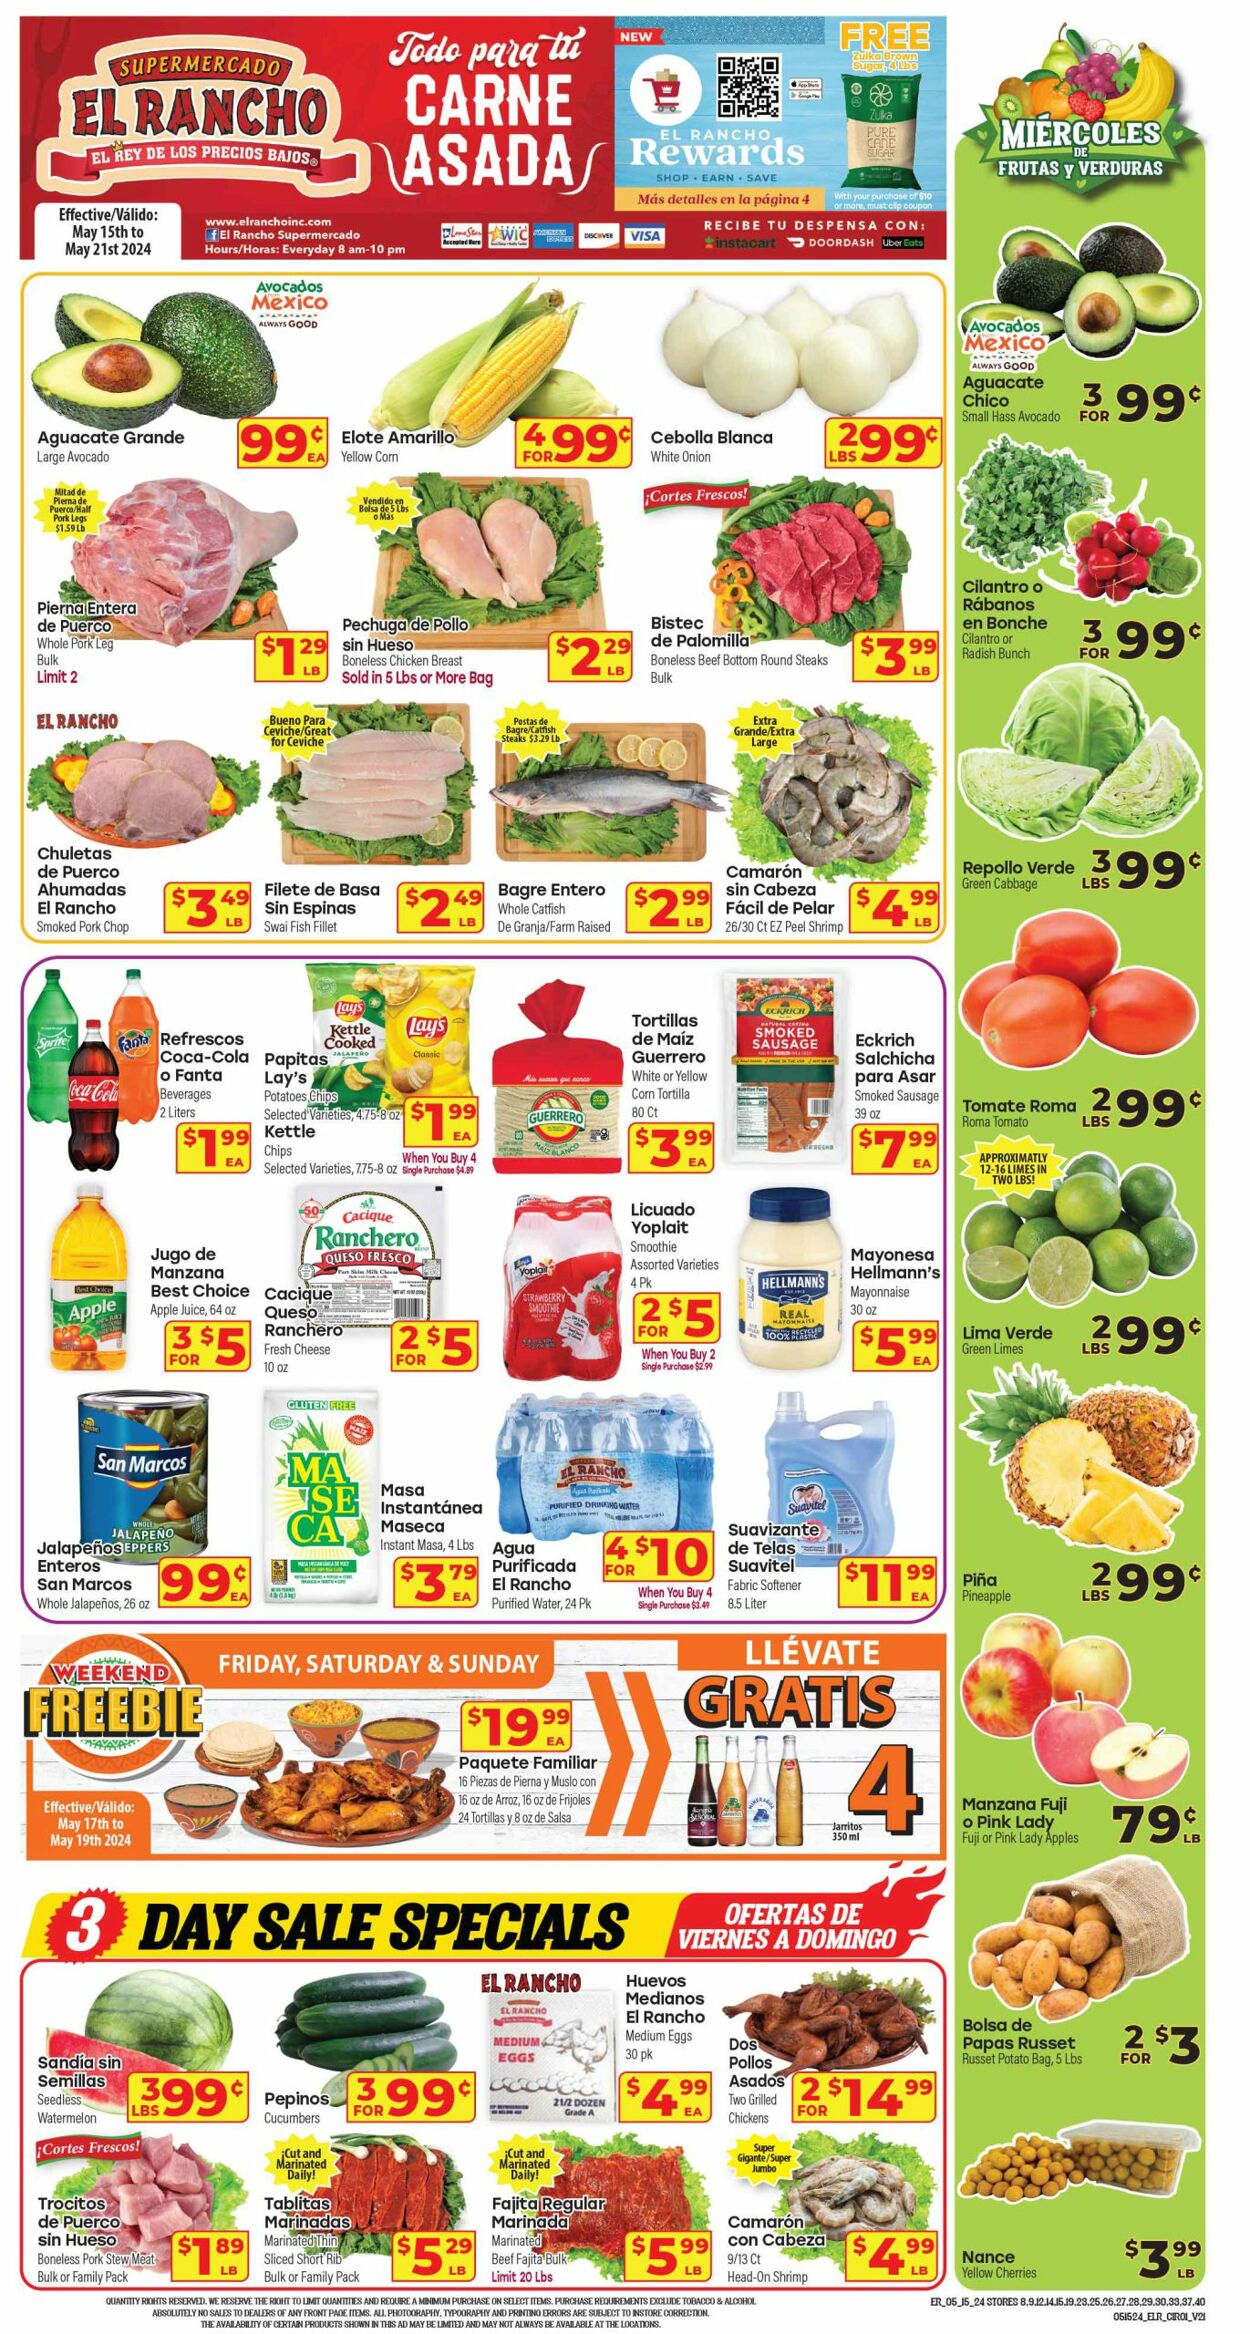 El Rancho Promotional weekly ads